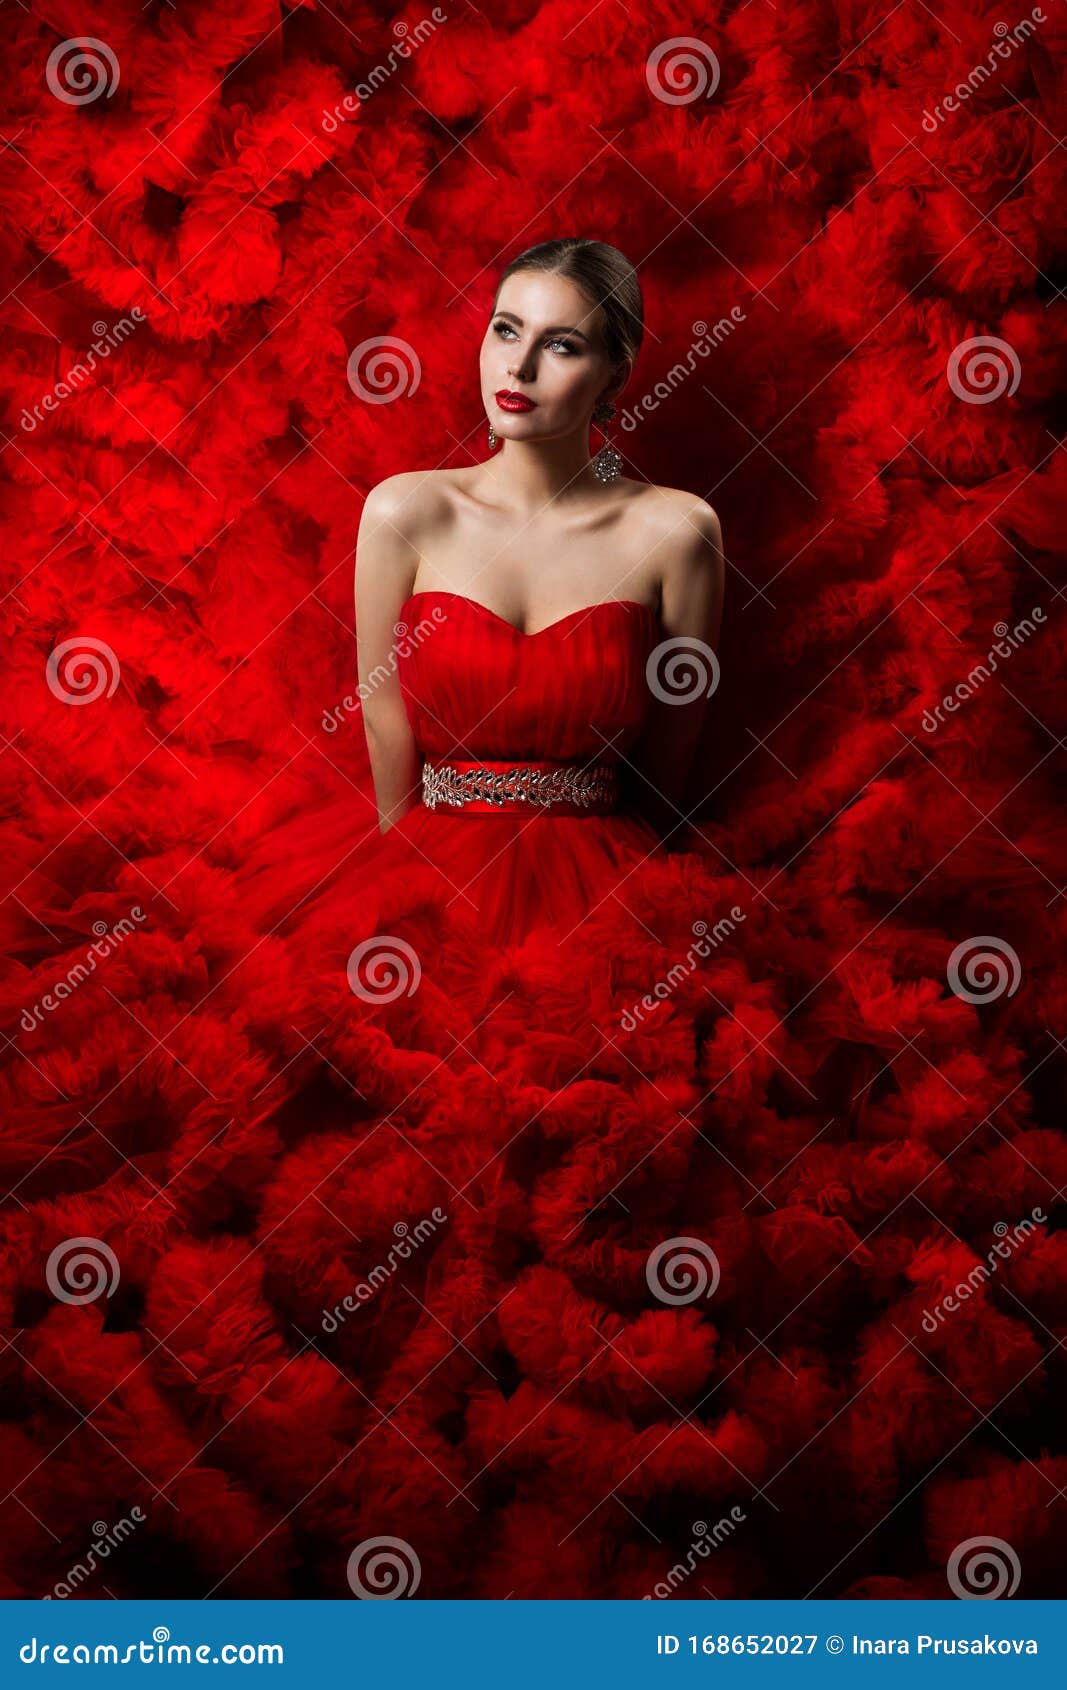 girl in red gown